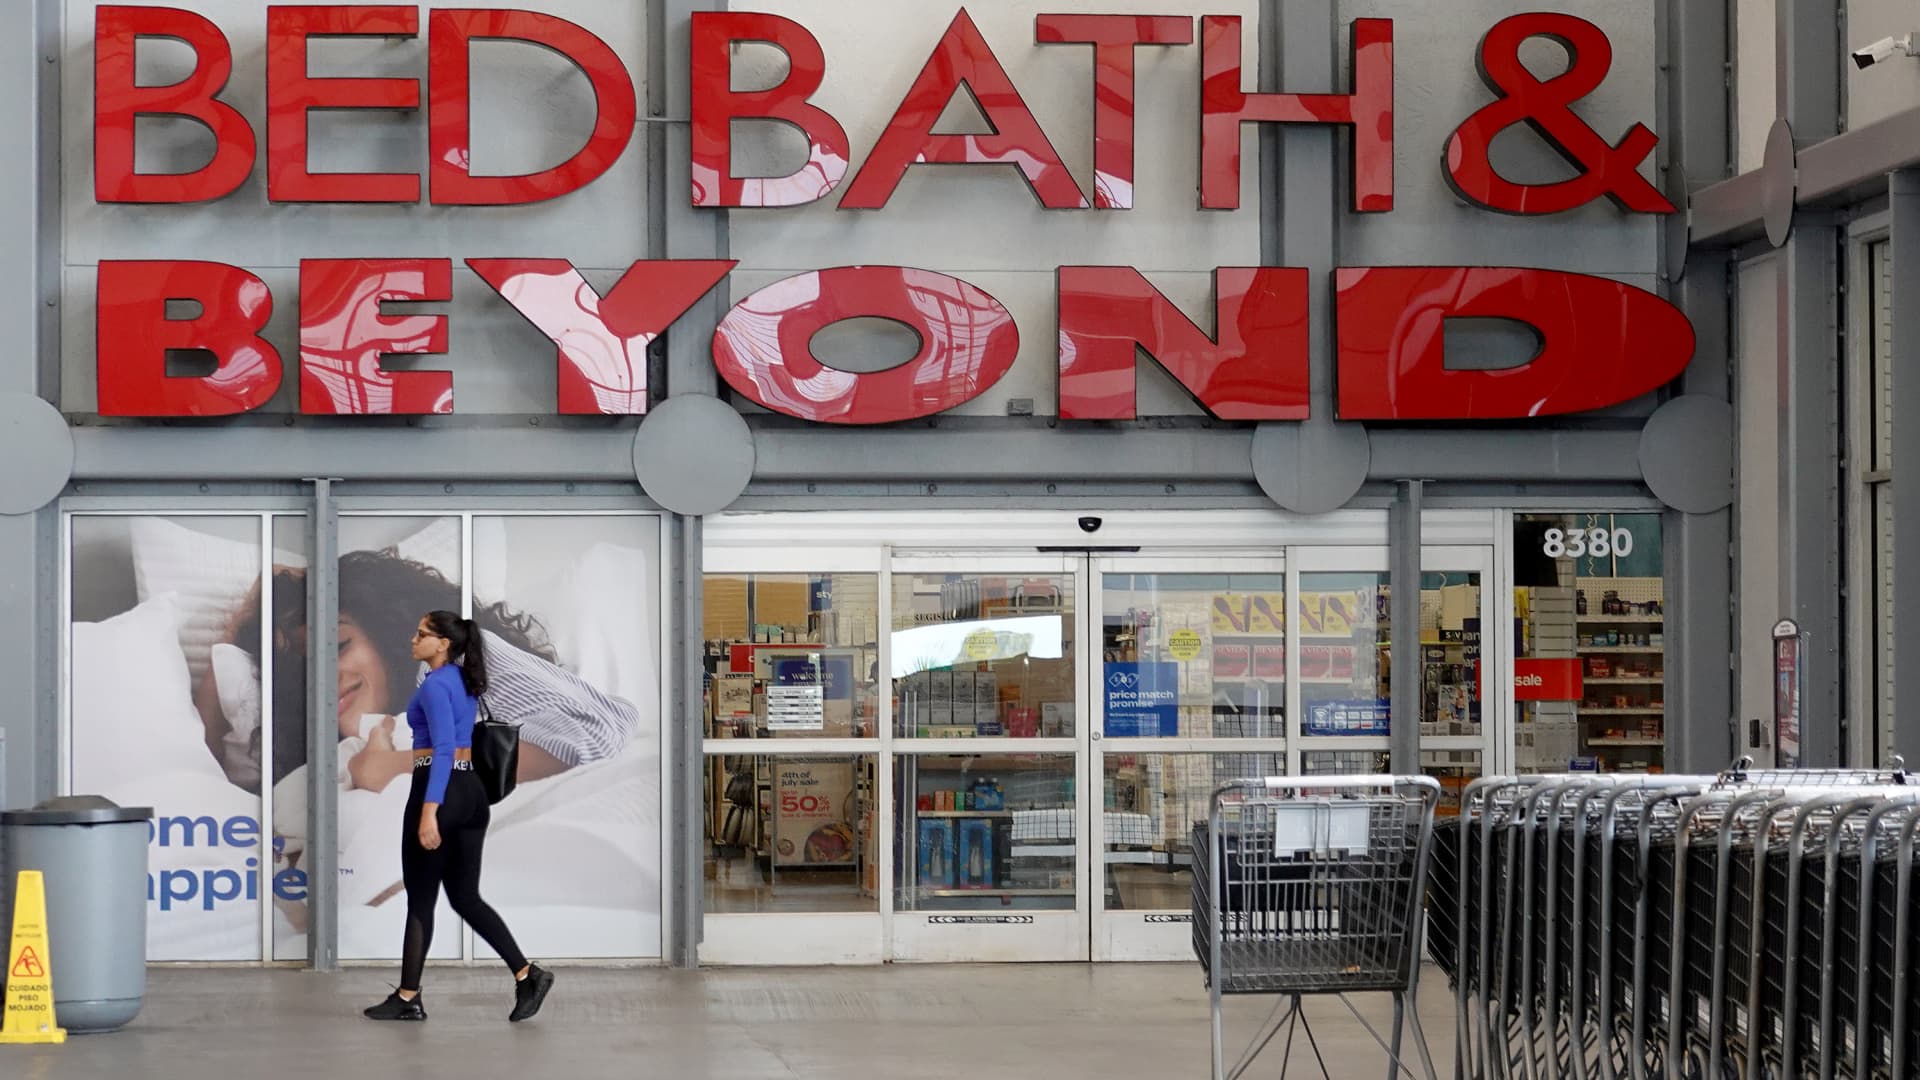 Bed Bath & Beyond soars 70% as meme traders talk up Ryan Cohen’s call options purchase